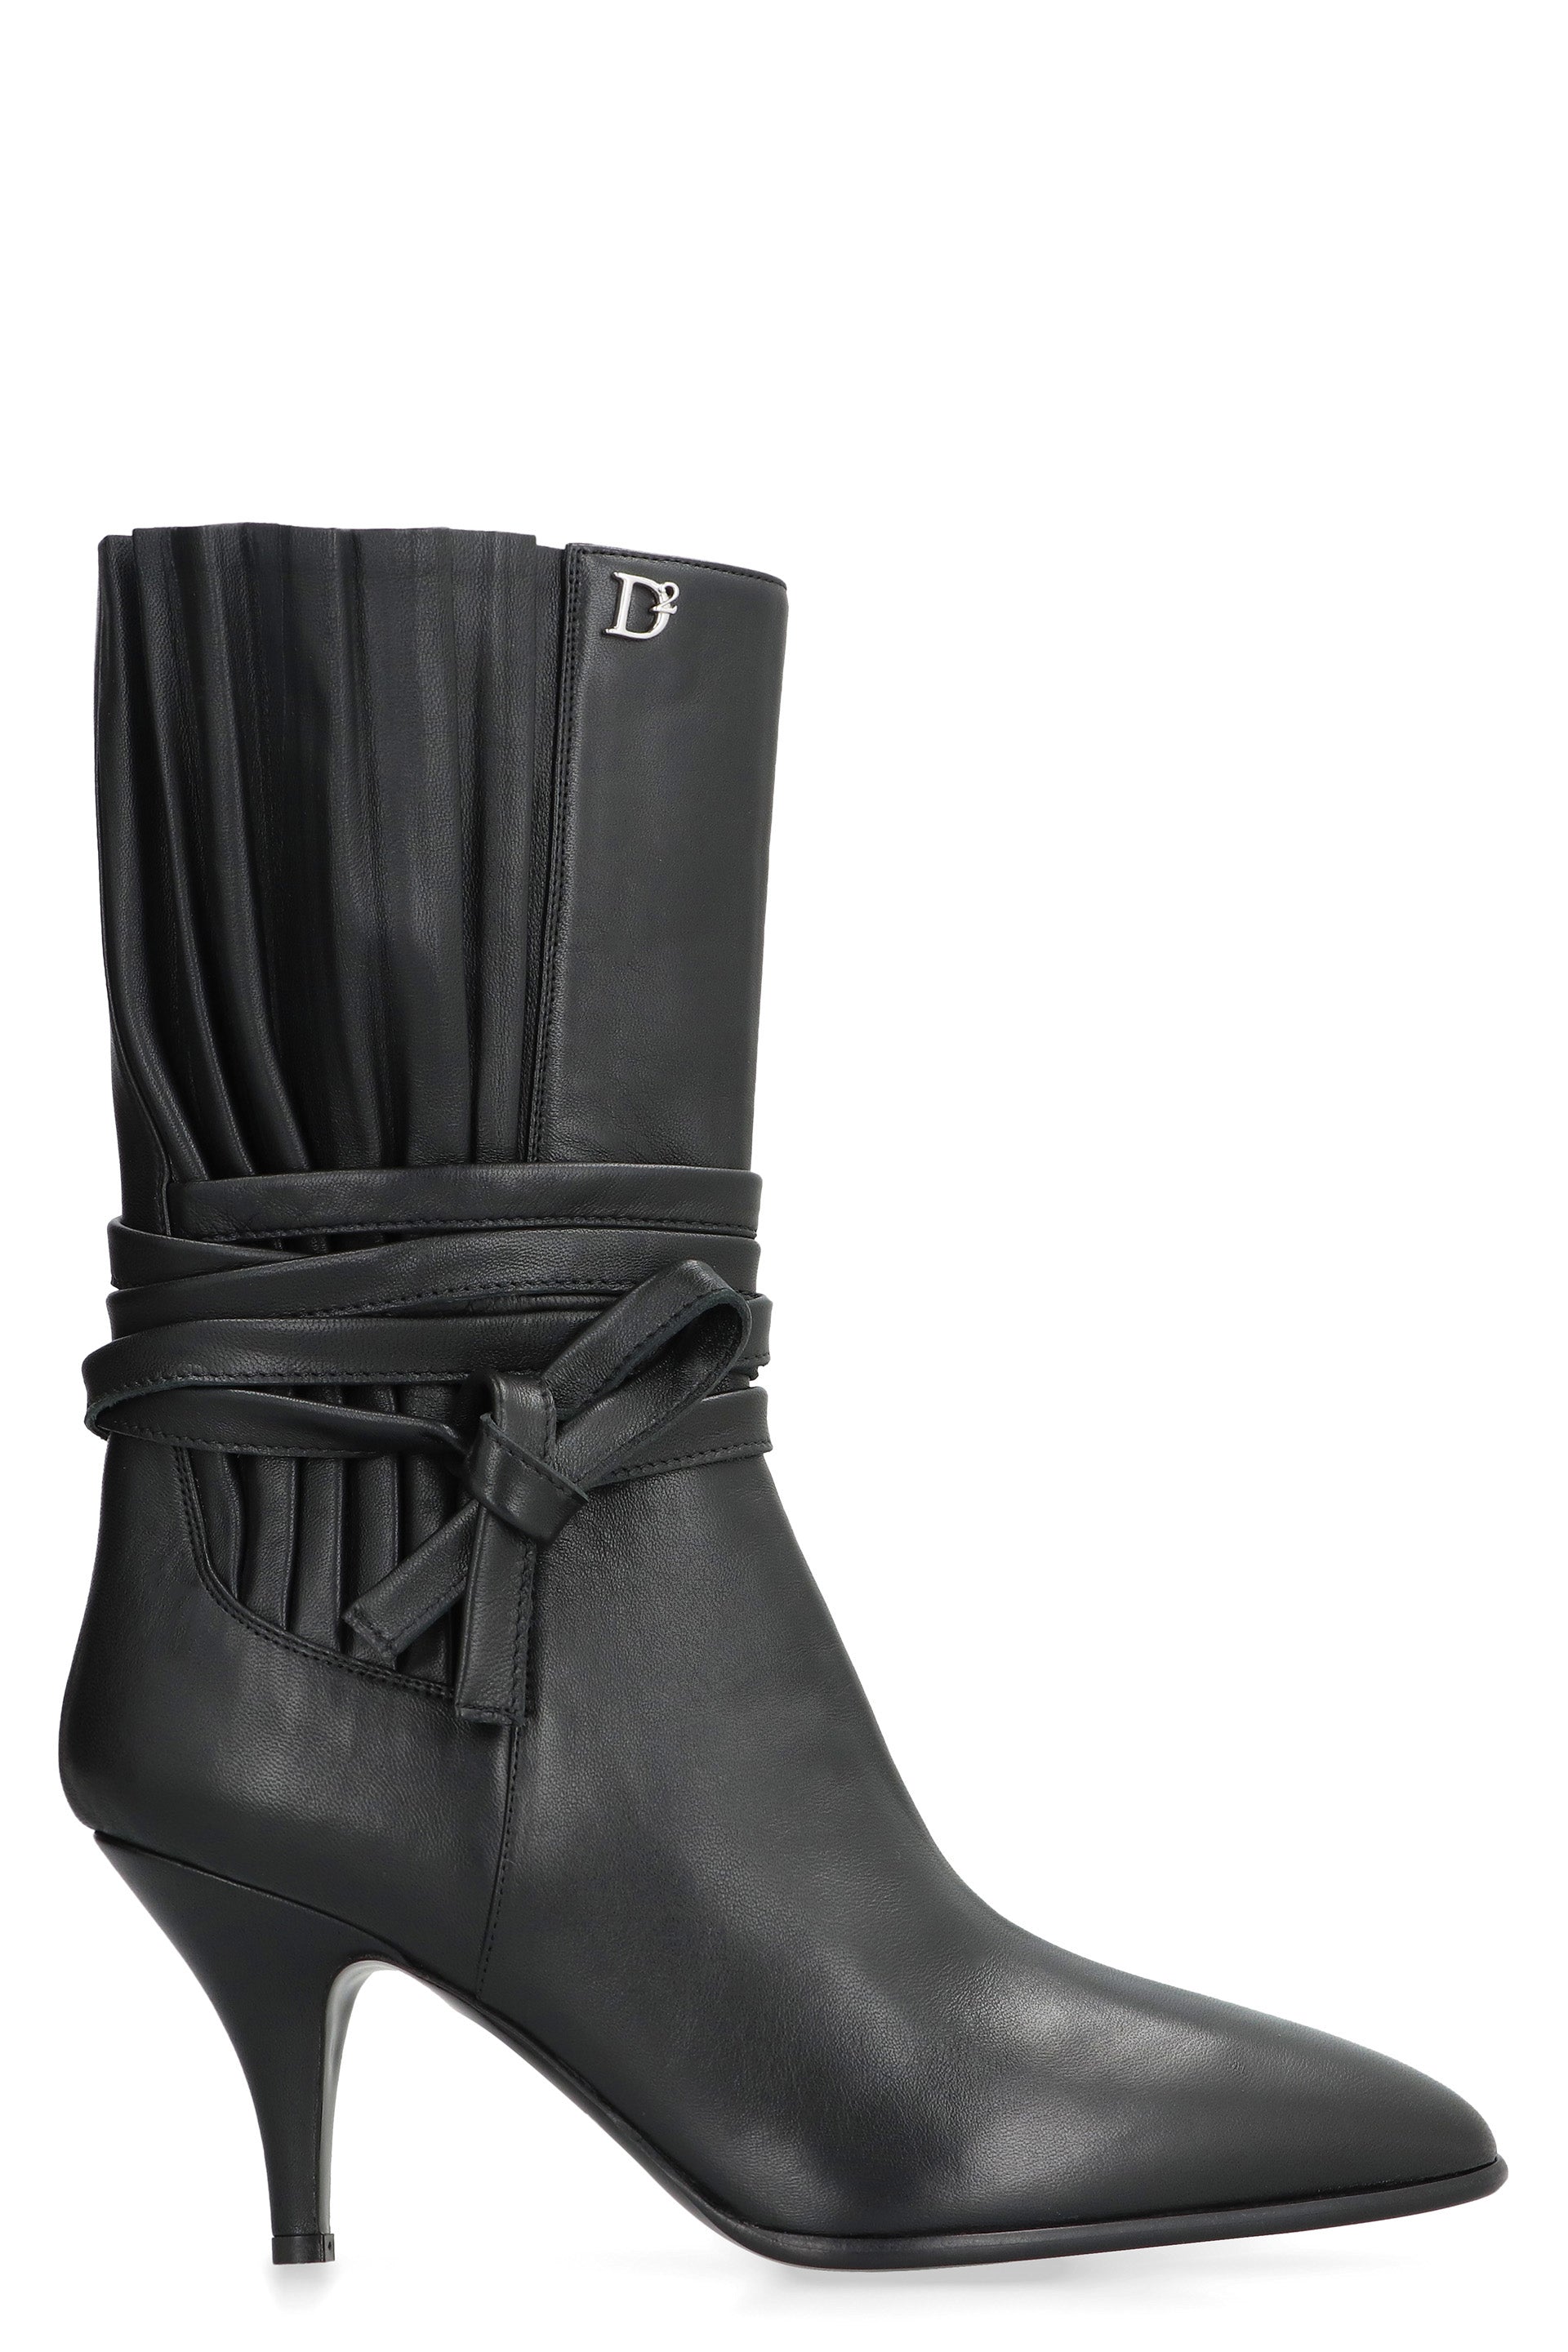 Dsquared2 Black Leather Ankle Boots With Pleated Insert, Lace Up Ankle Tie And Stiletto Heel For Women